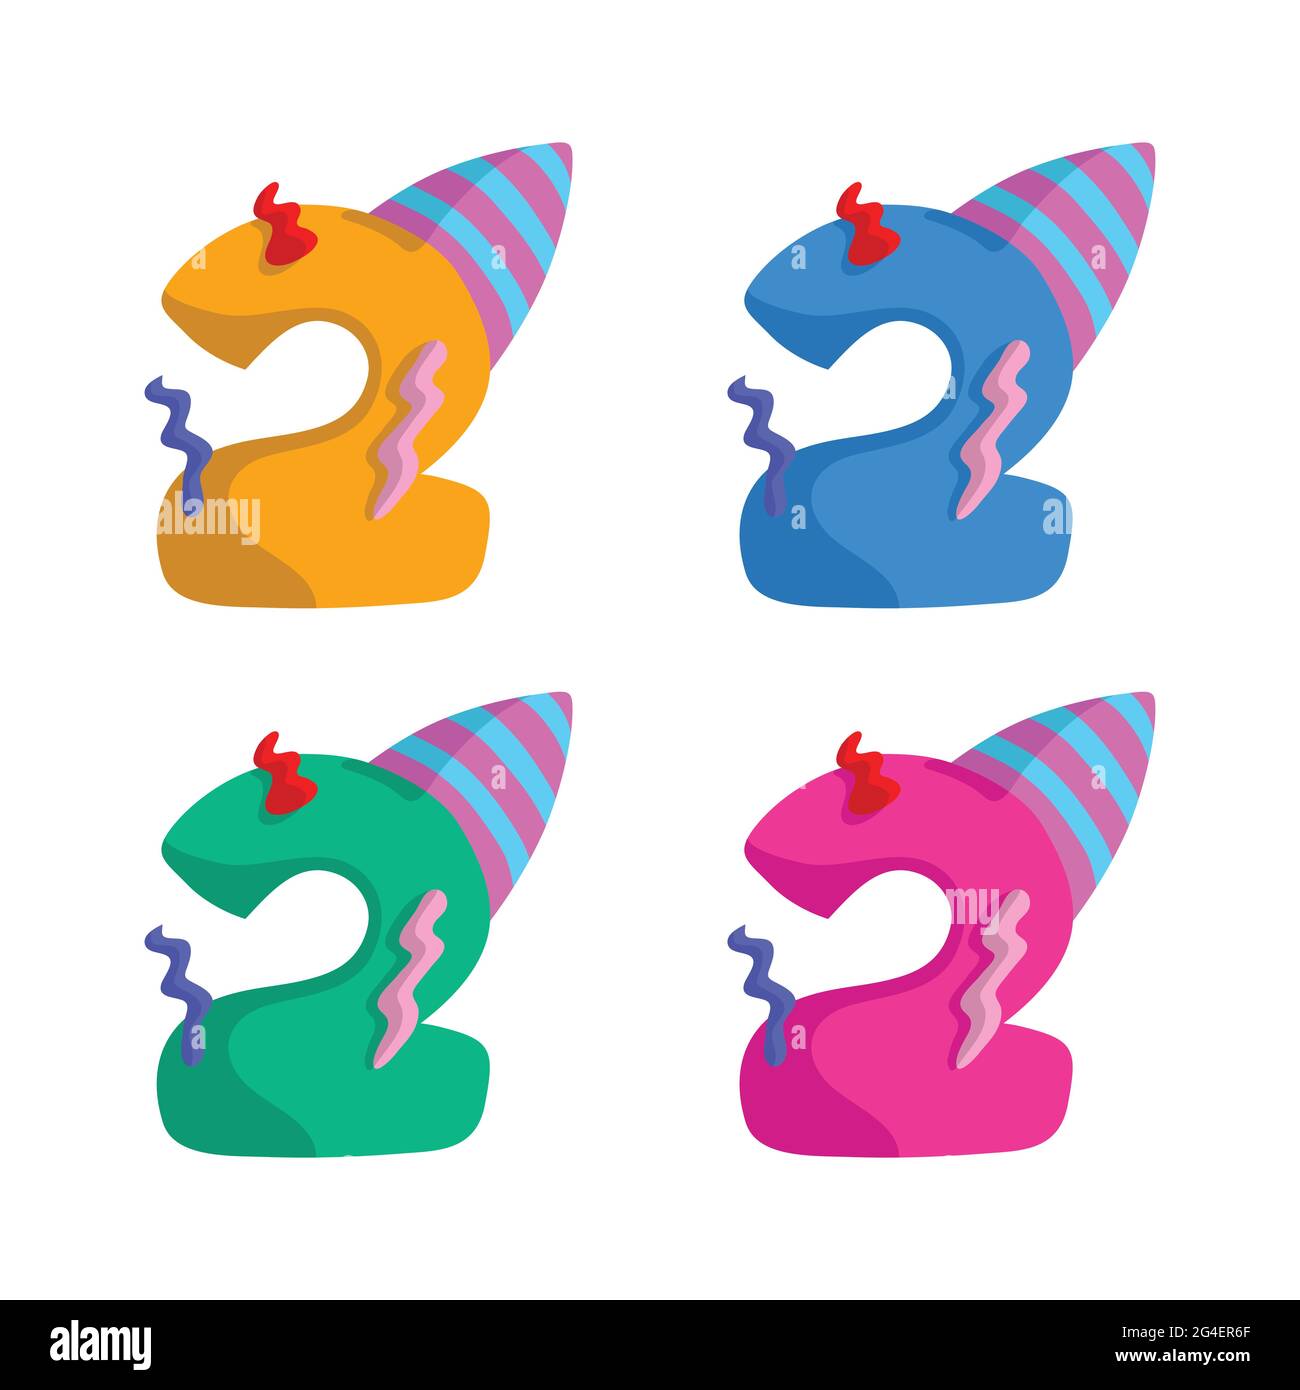 2 year birthday candle flat design vector illustration with different color choice. Stock Vector